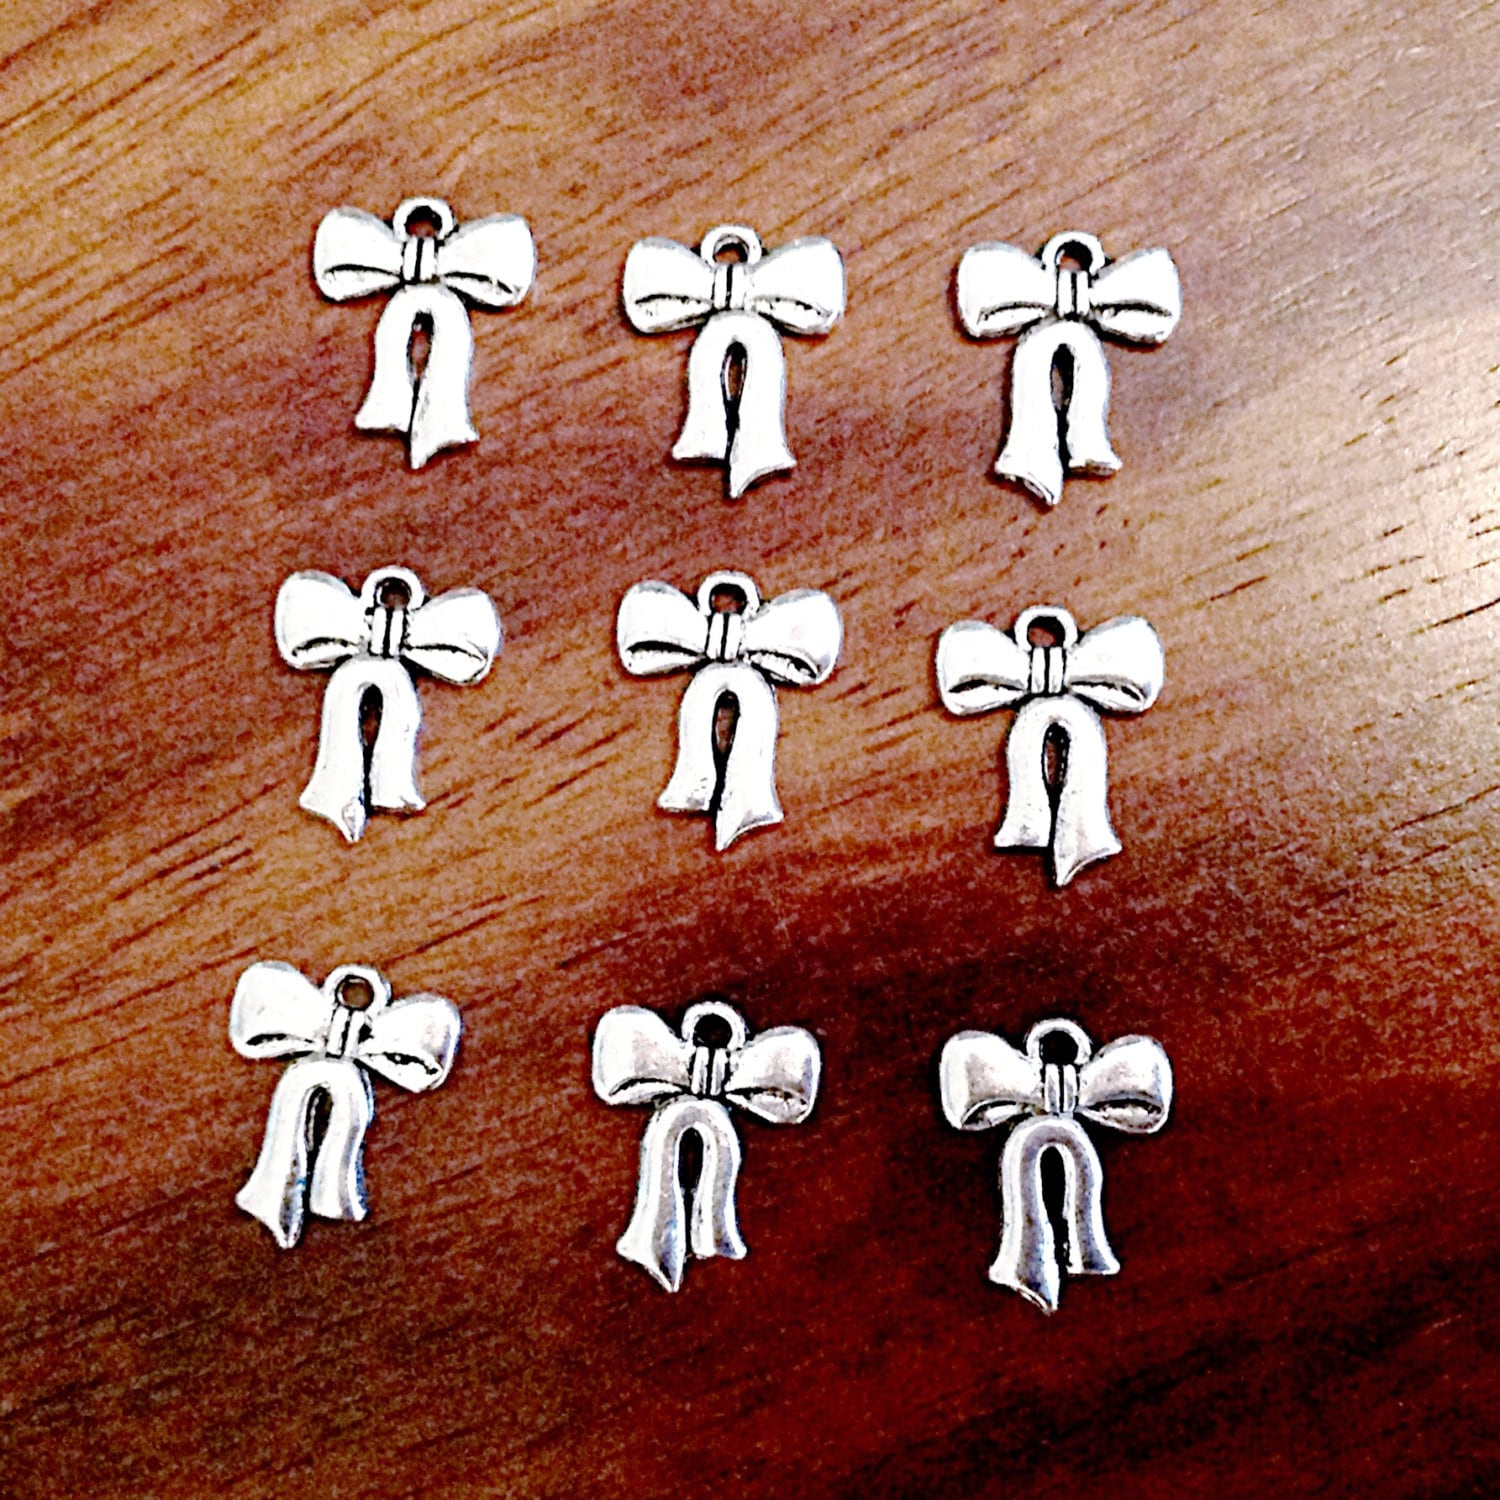 Mix 20pcs/pack Little Bow Enamel Charms Earring Keychain Necklace